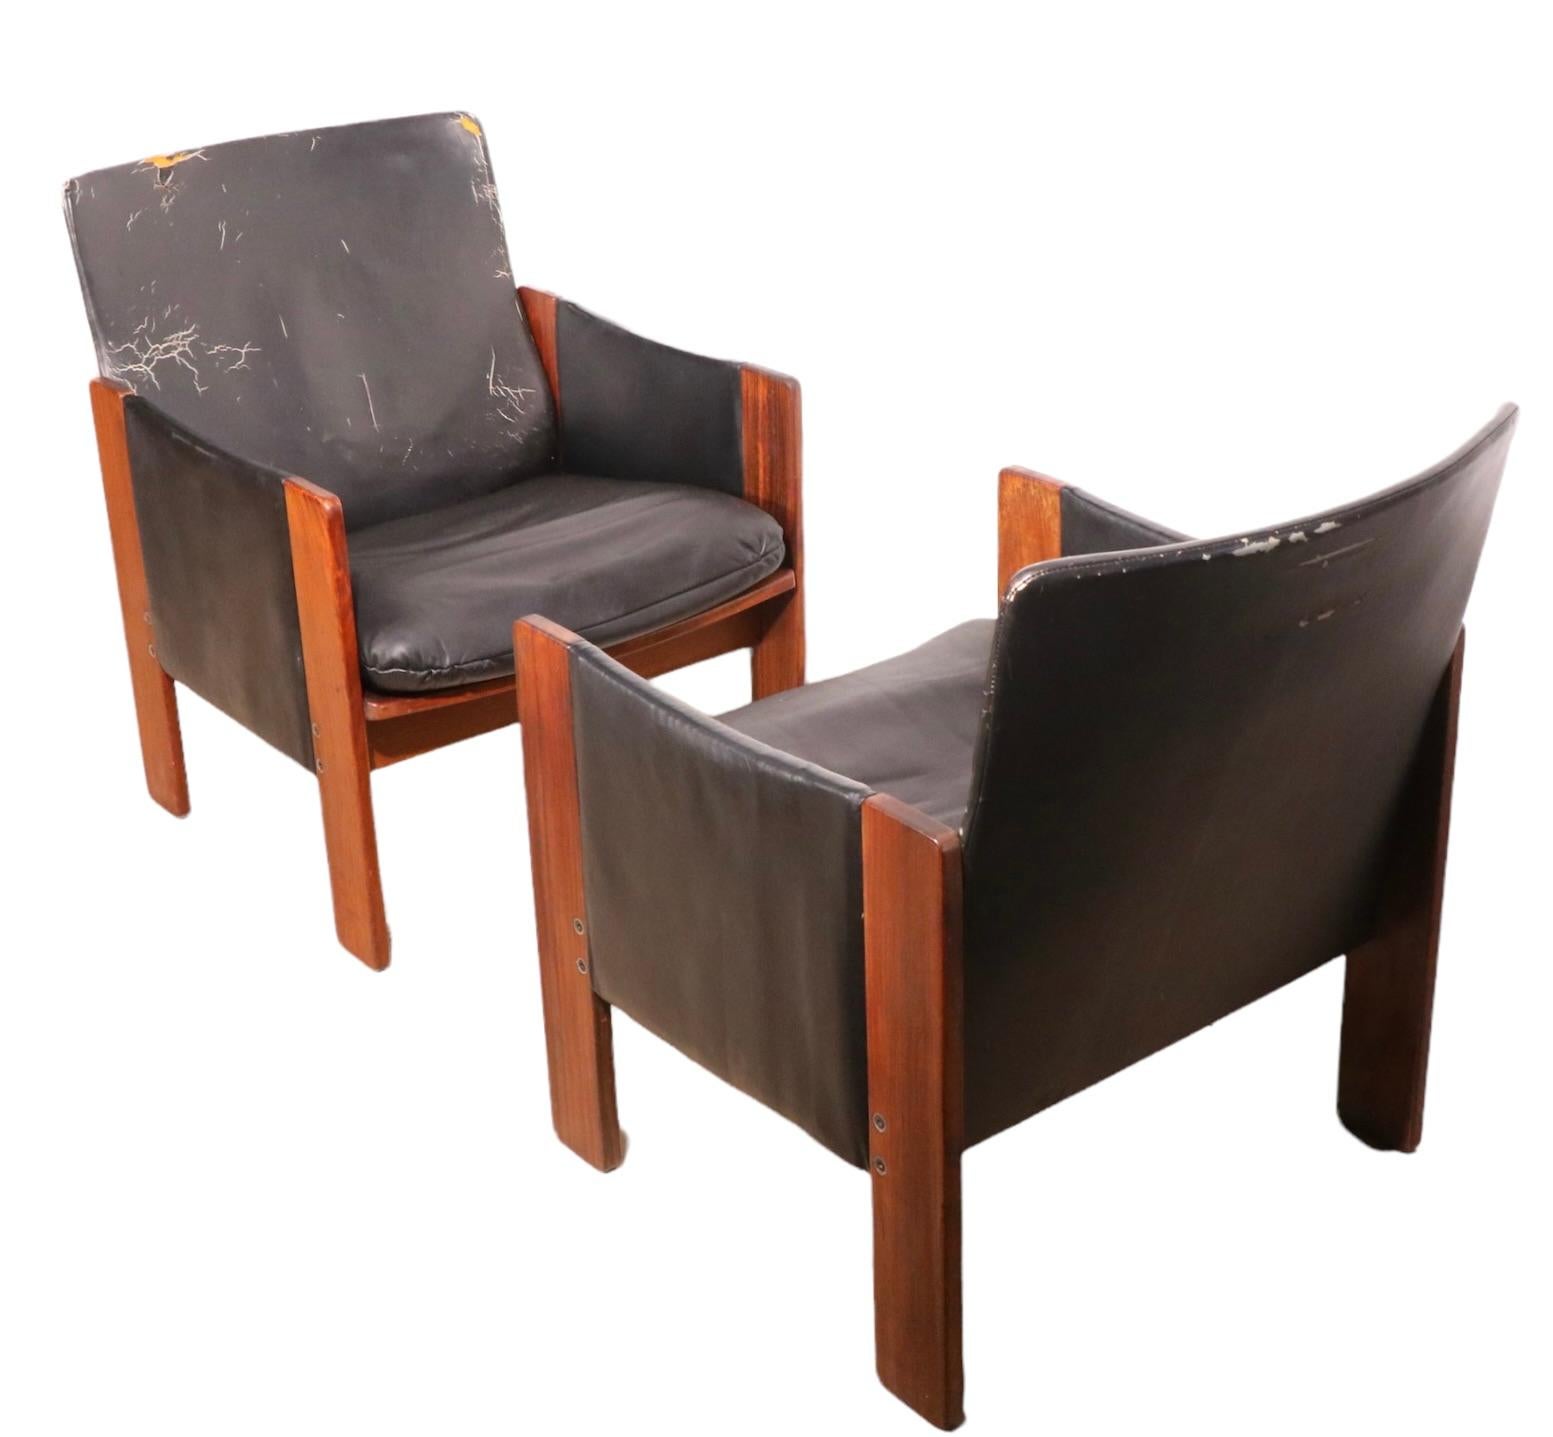 20th Century Pr. Rosewood and Leather Lounge Arm Chairs by Tobia Scarpa for Cassina For Sale